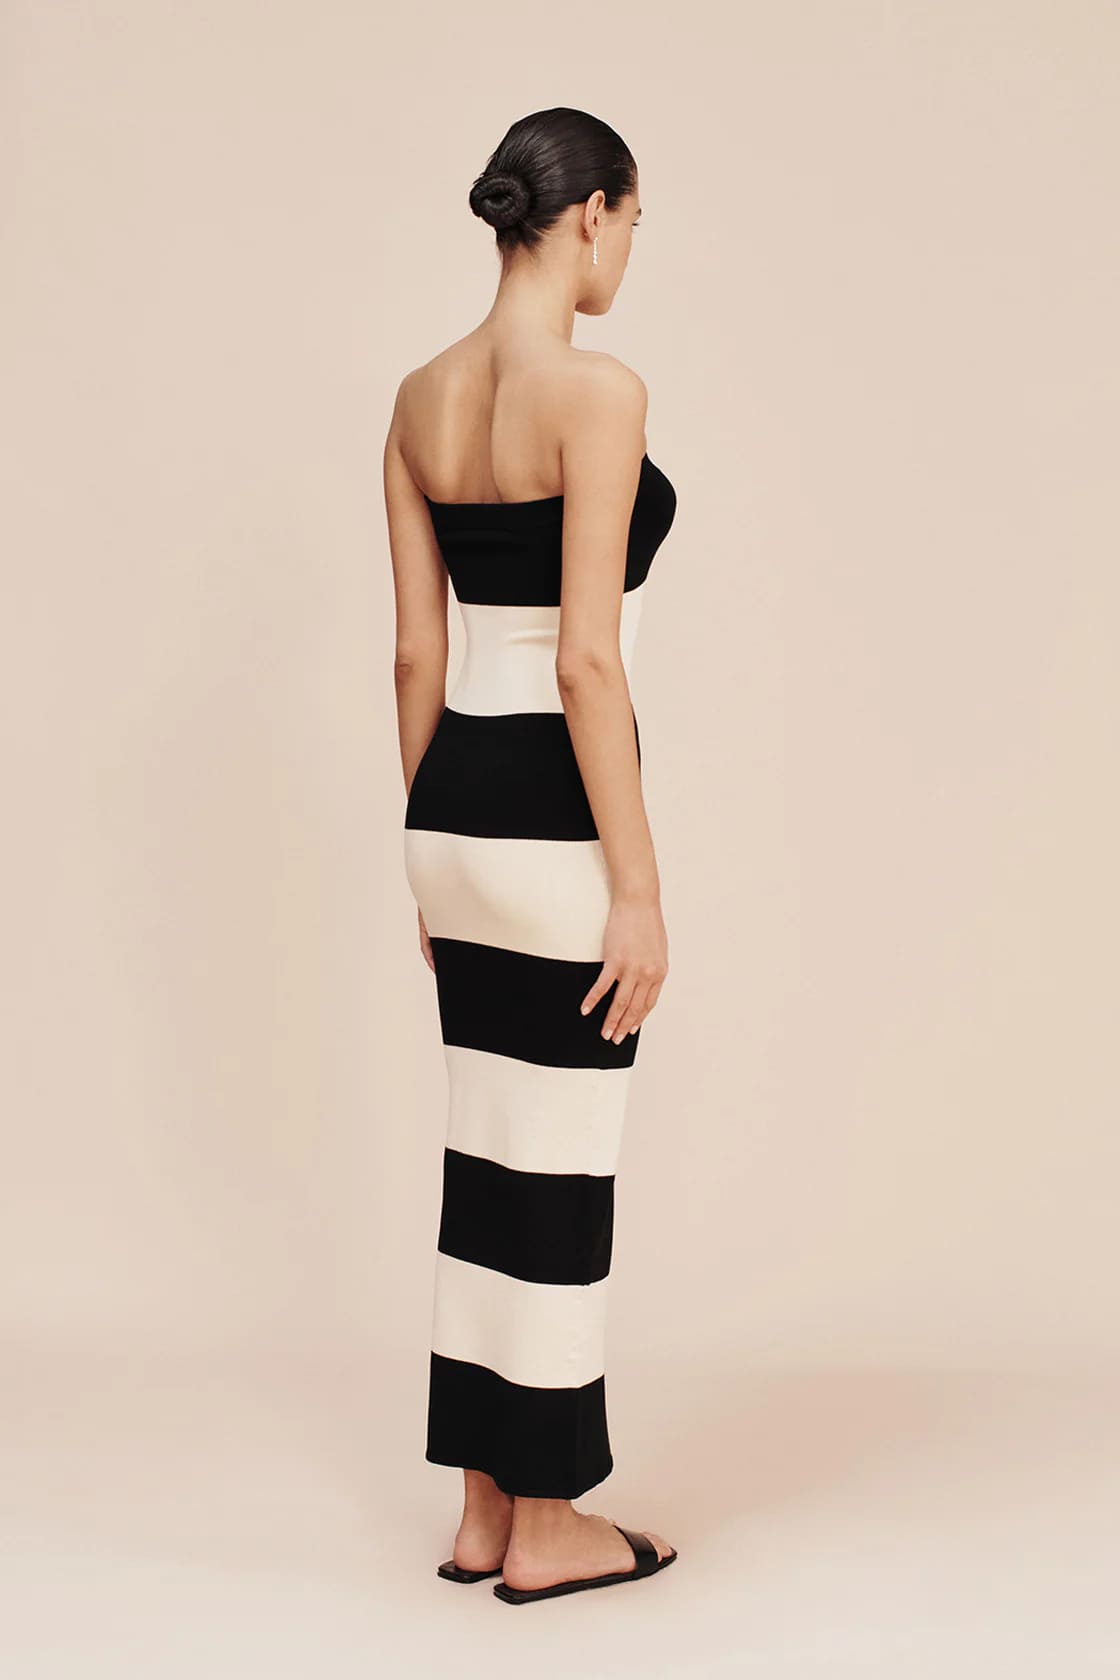 Posse Theo Strapless Dress in Bone and Black available at The New Trend Australia.